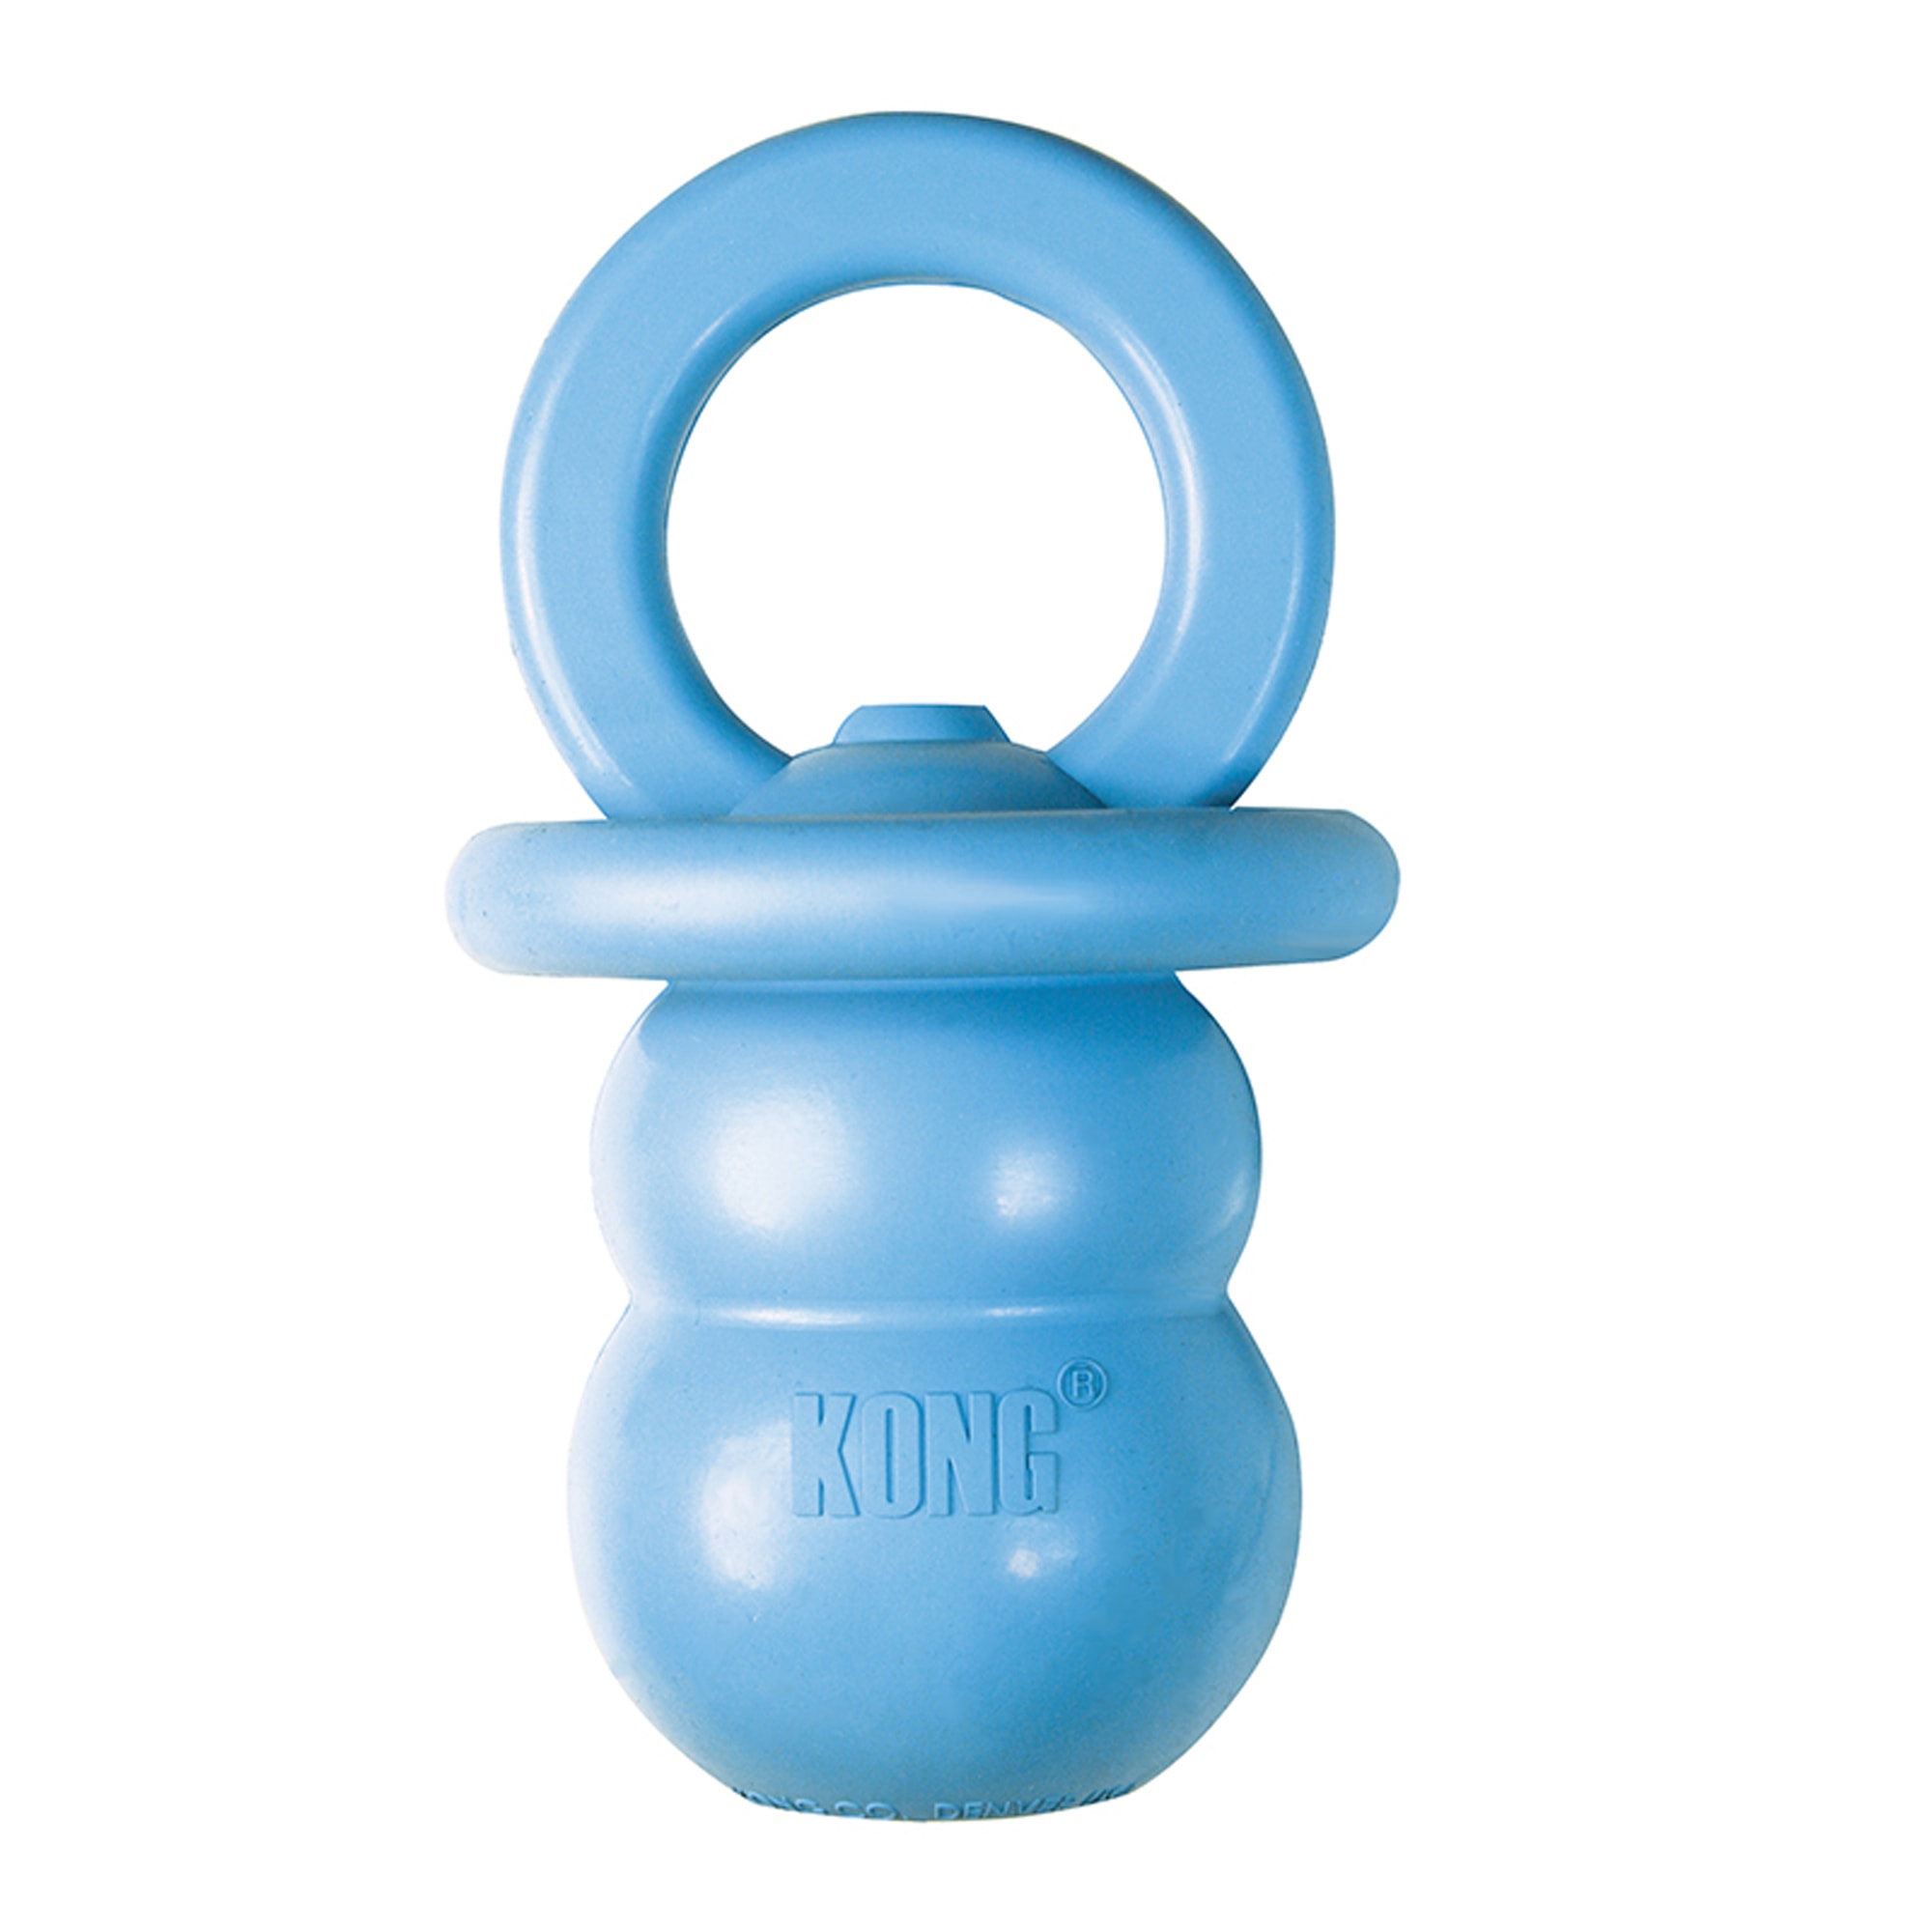 Photos - Dog Toy KONG Puppy Binkie Assorted Toy, Small, Blue KP37 